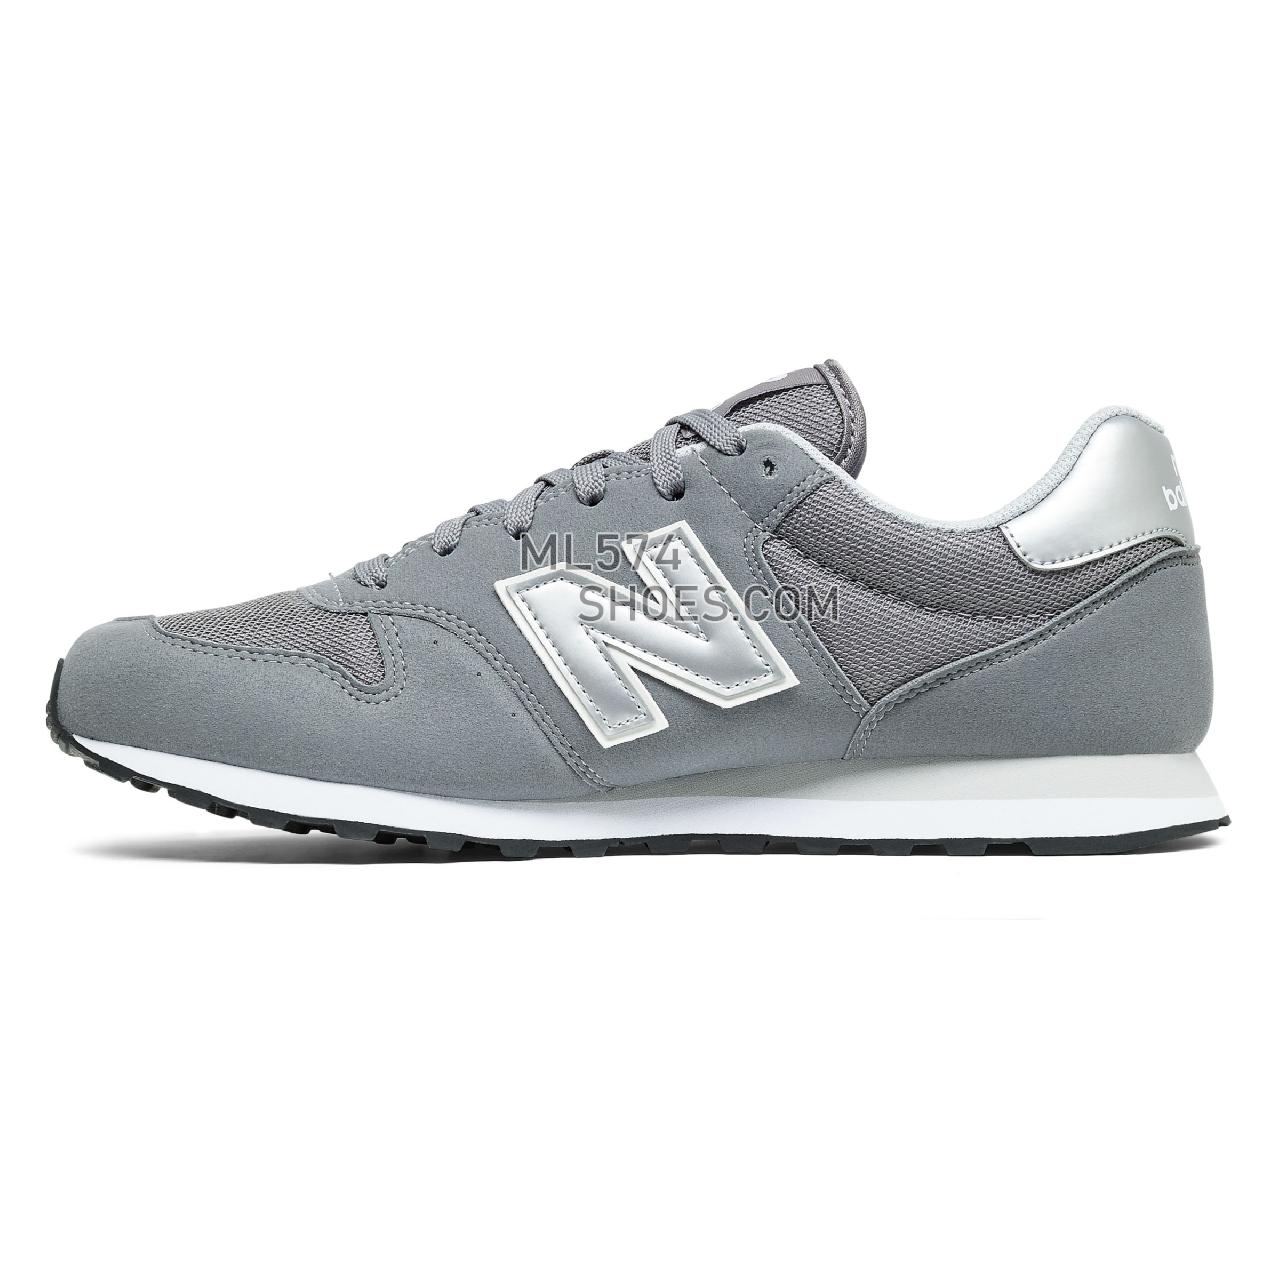 New Balance 500 Classic - Men's Classic Sneakers - Grey with White - GM500GRY